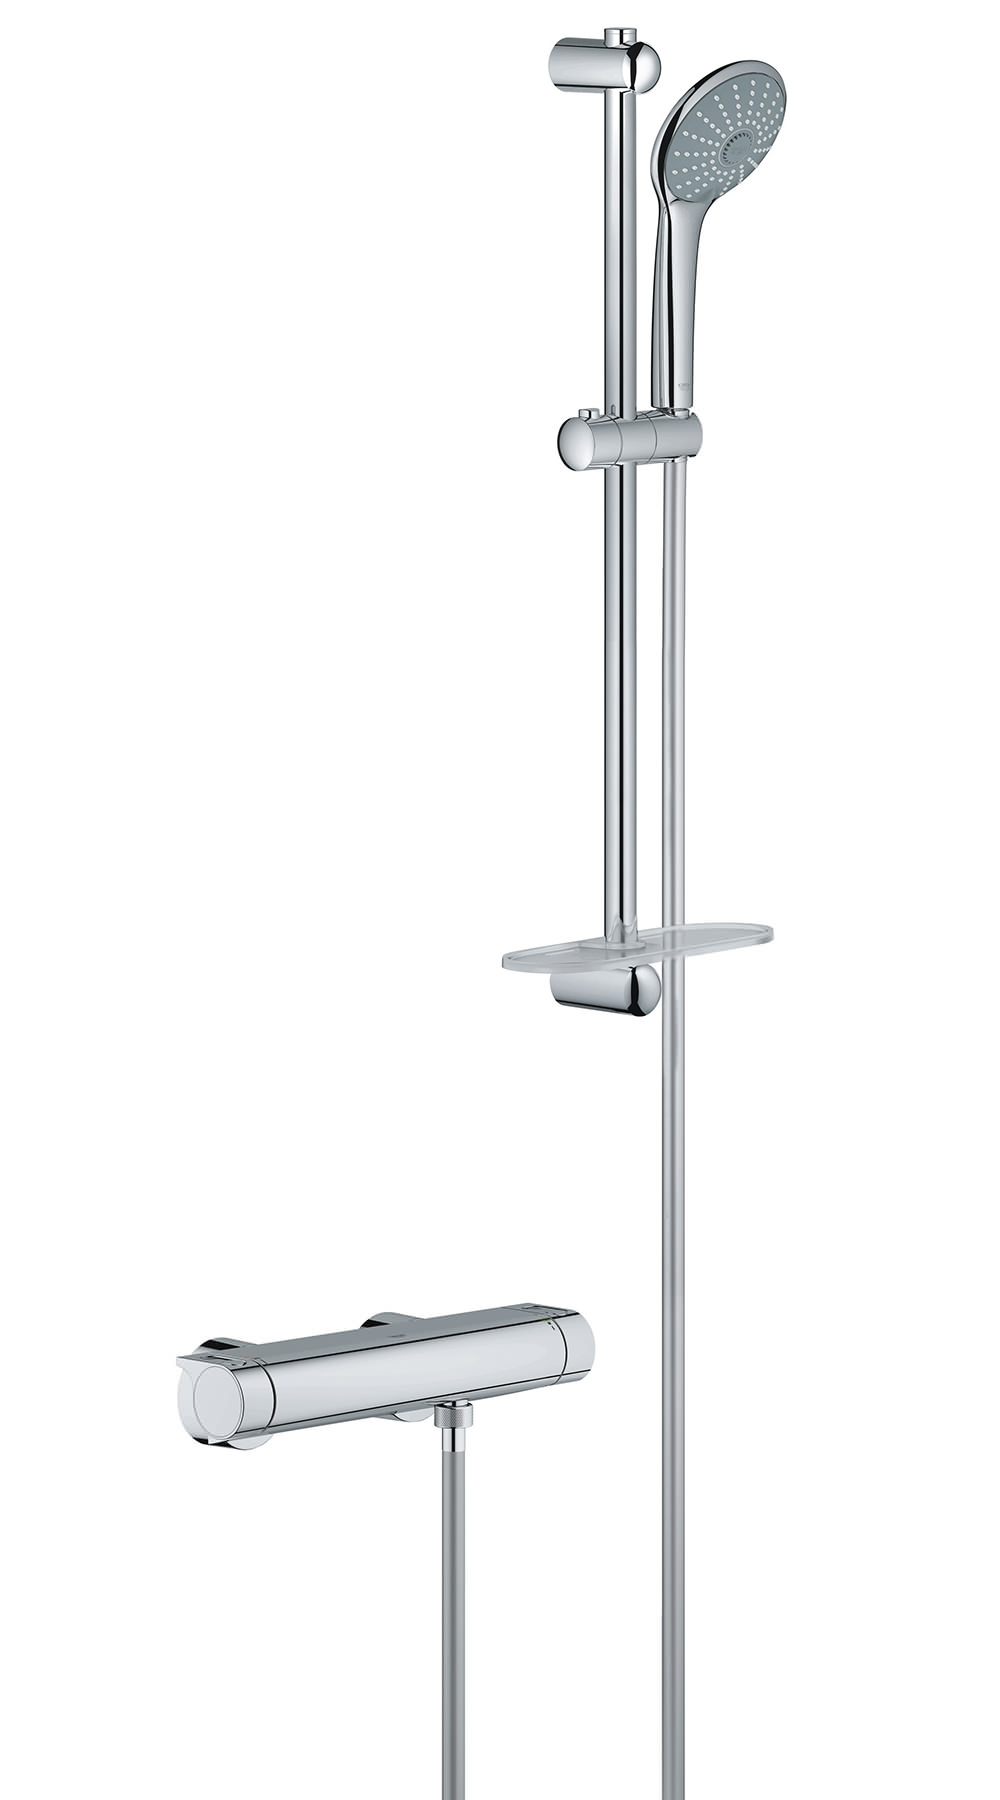 Grohe showers for combi boilers